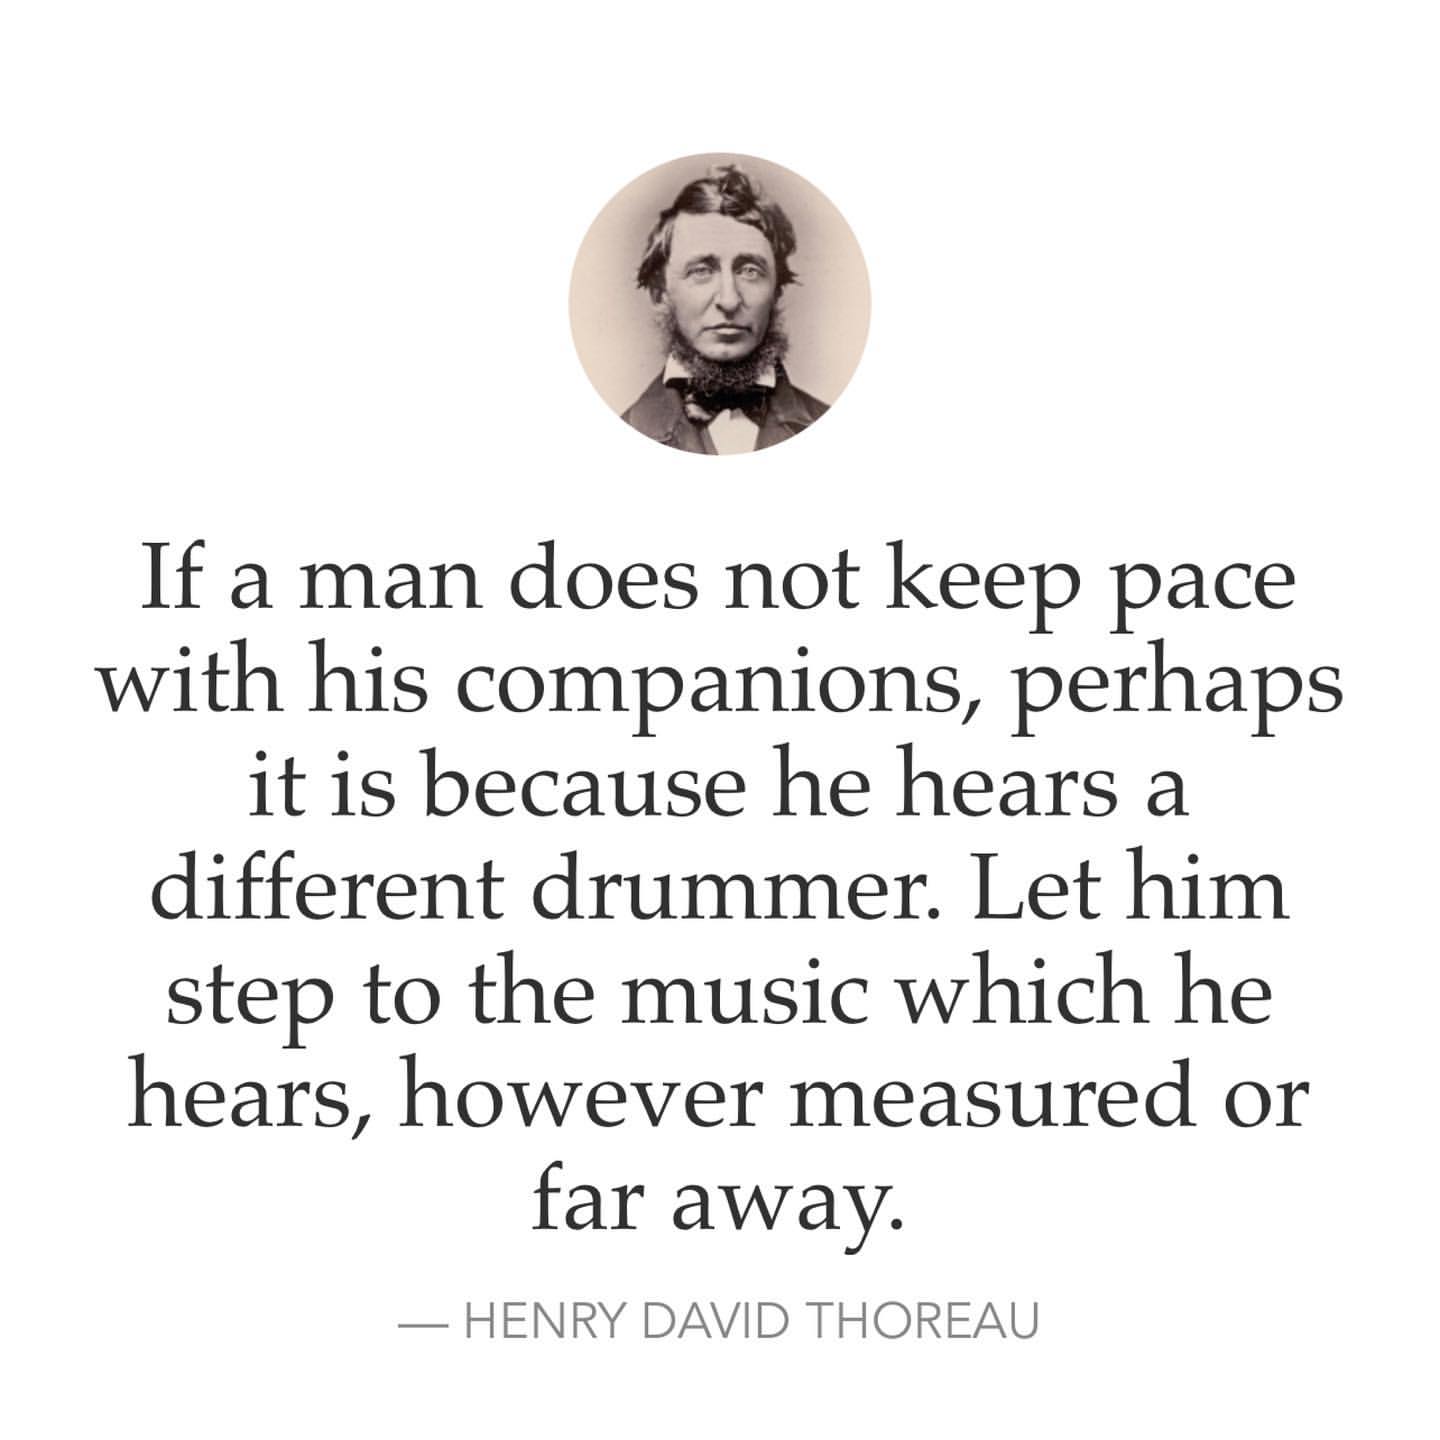 If a man does not keep pace with his companions, perhaps it is because he hears a different drummer. Let him step to the music which he hears, however measured or far away. Henry David Thoreau.